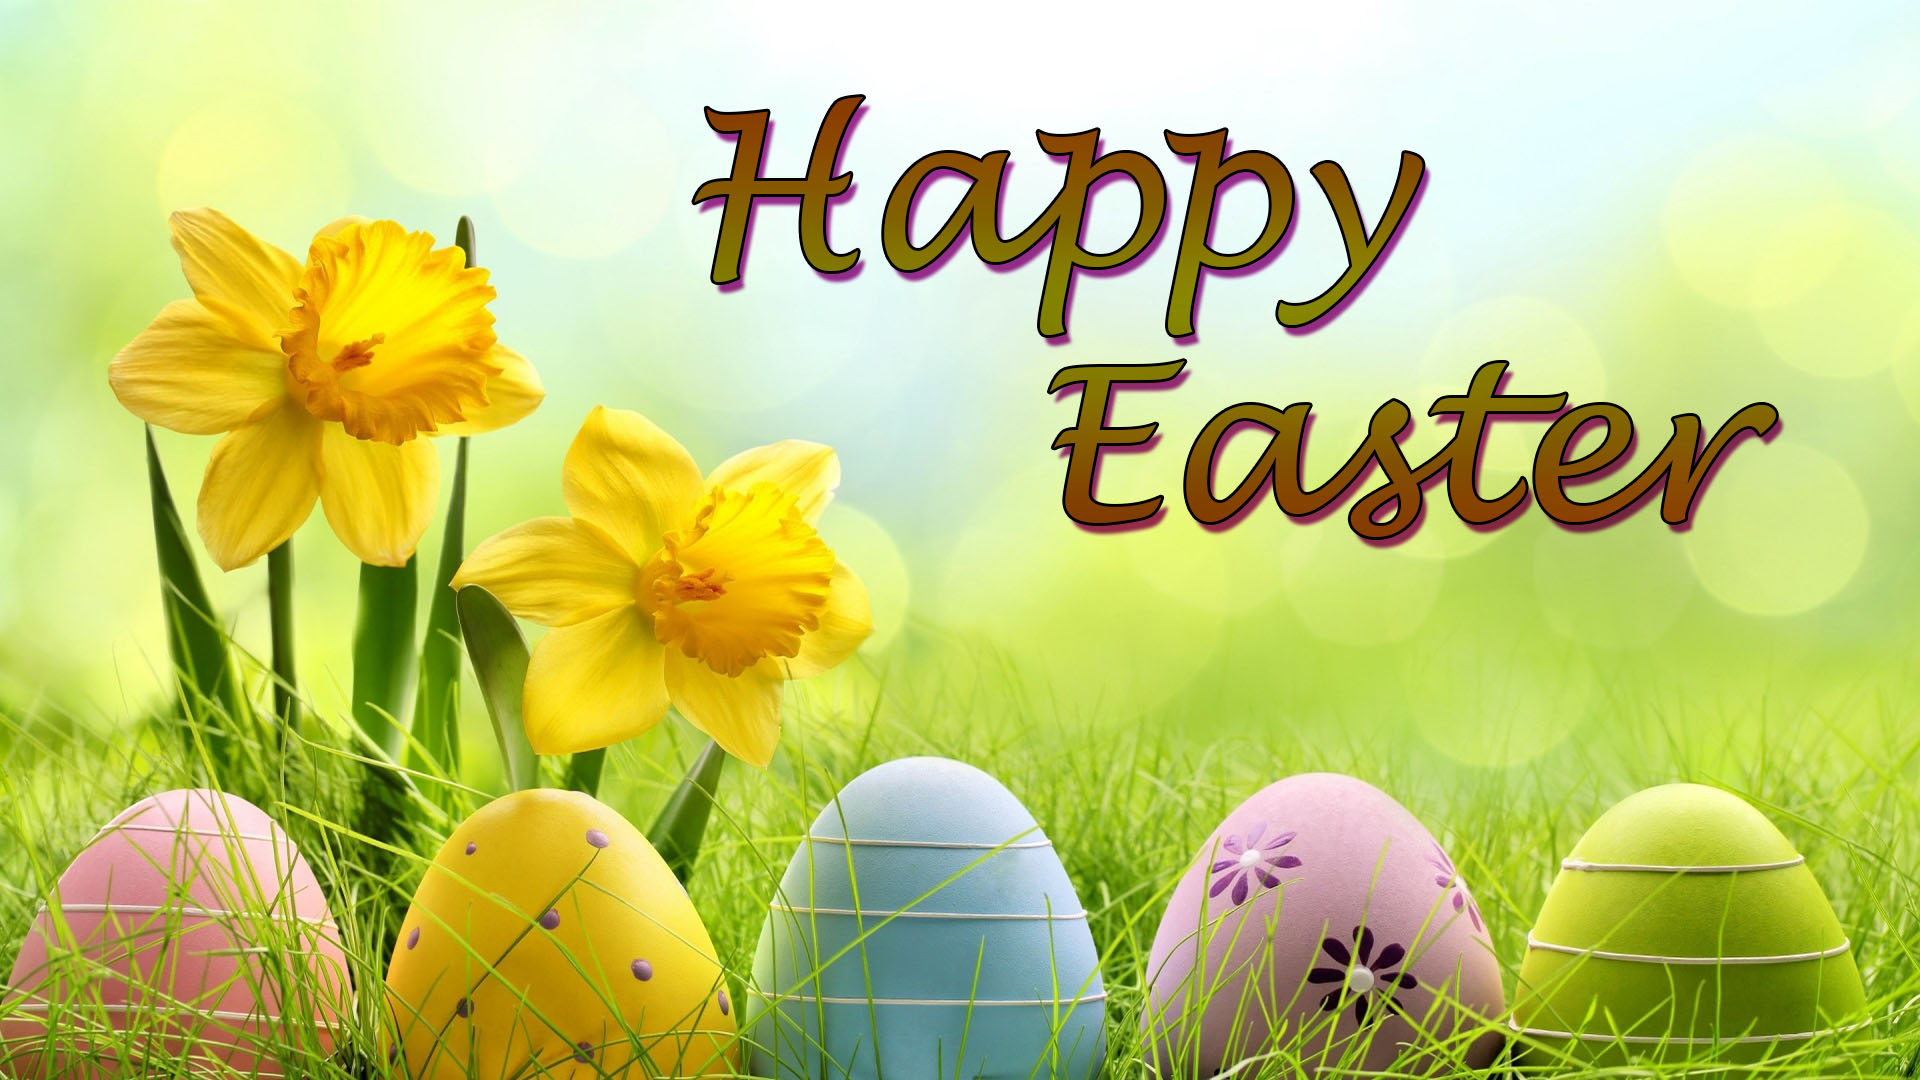 happy easter 2018 image